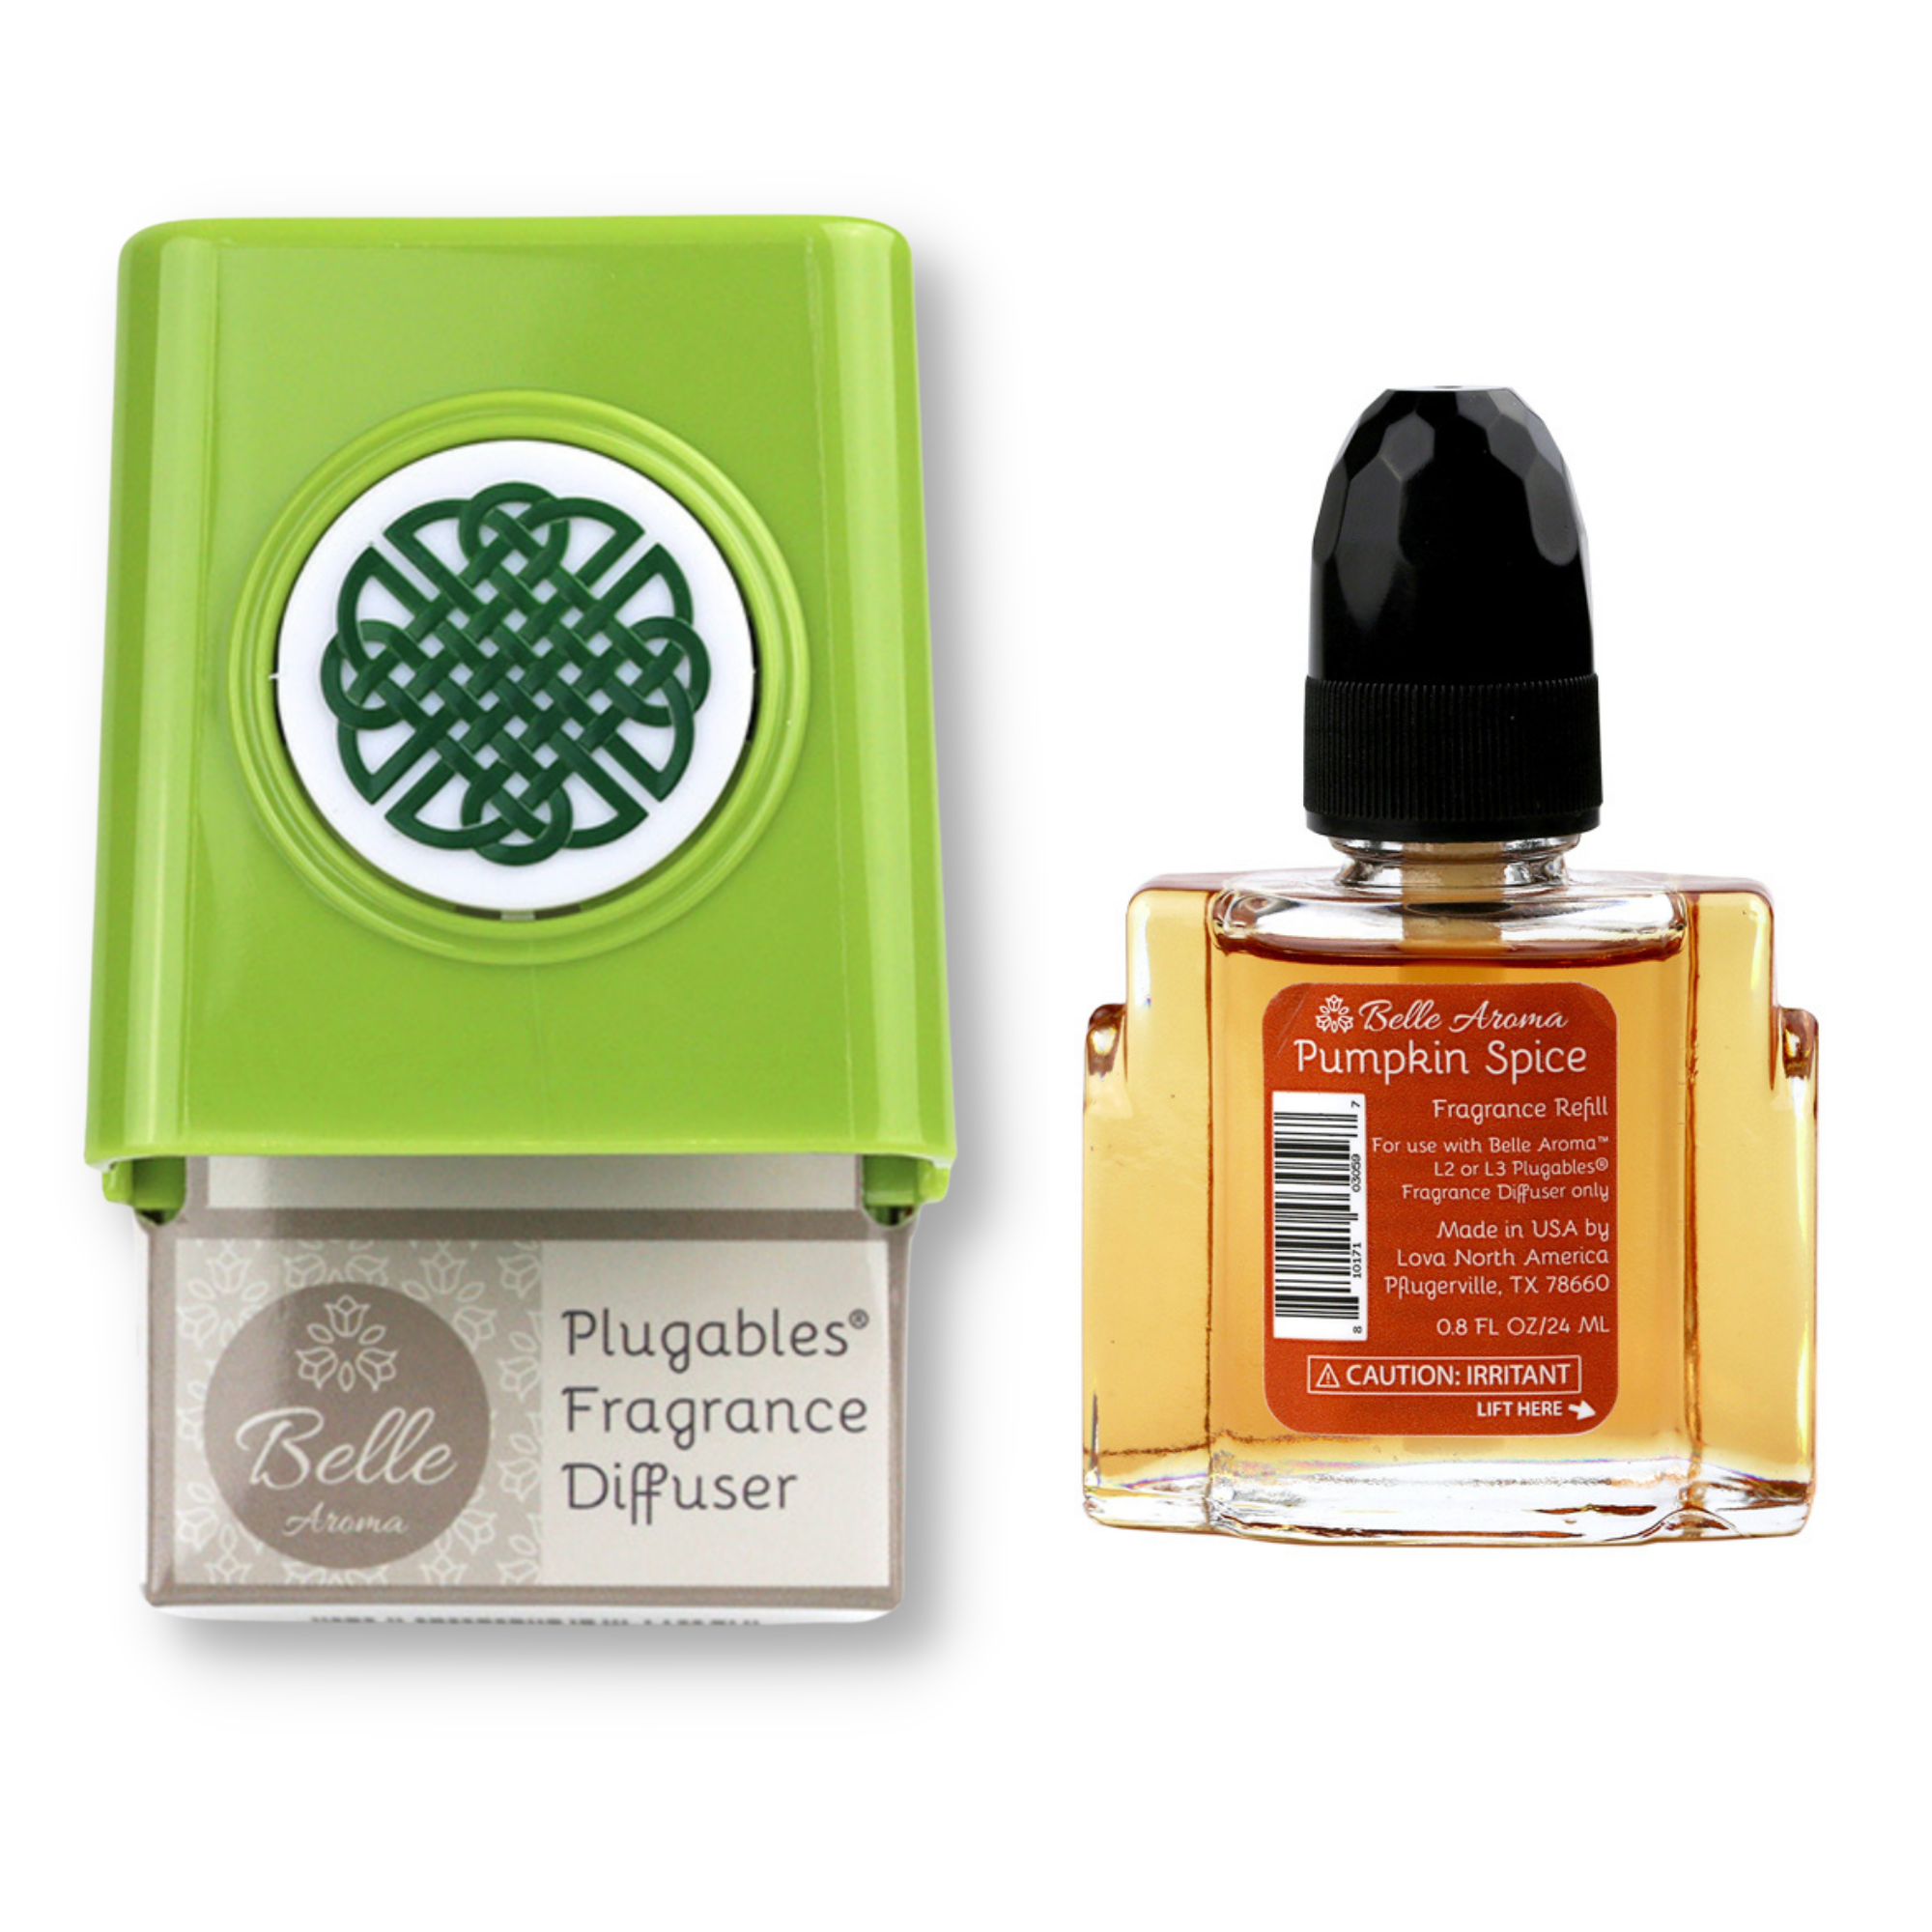 Celtic Knot Medallion Plugables® Plugin Electric Scented Oil Diffuser - Granny Smith with Pumpkin Spice Fragrance Oil Home Fragrance Accessories